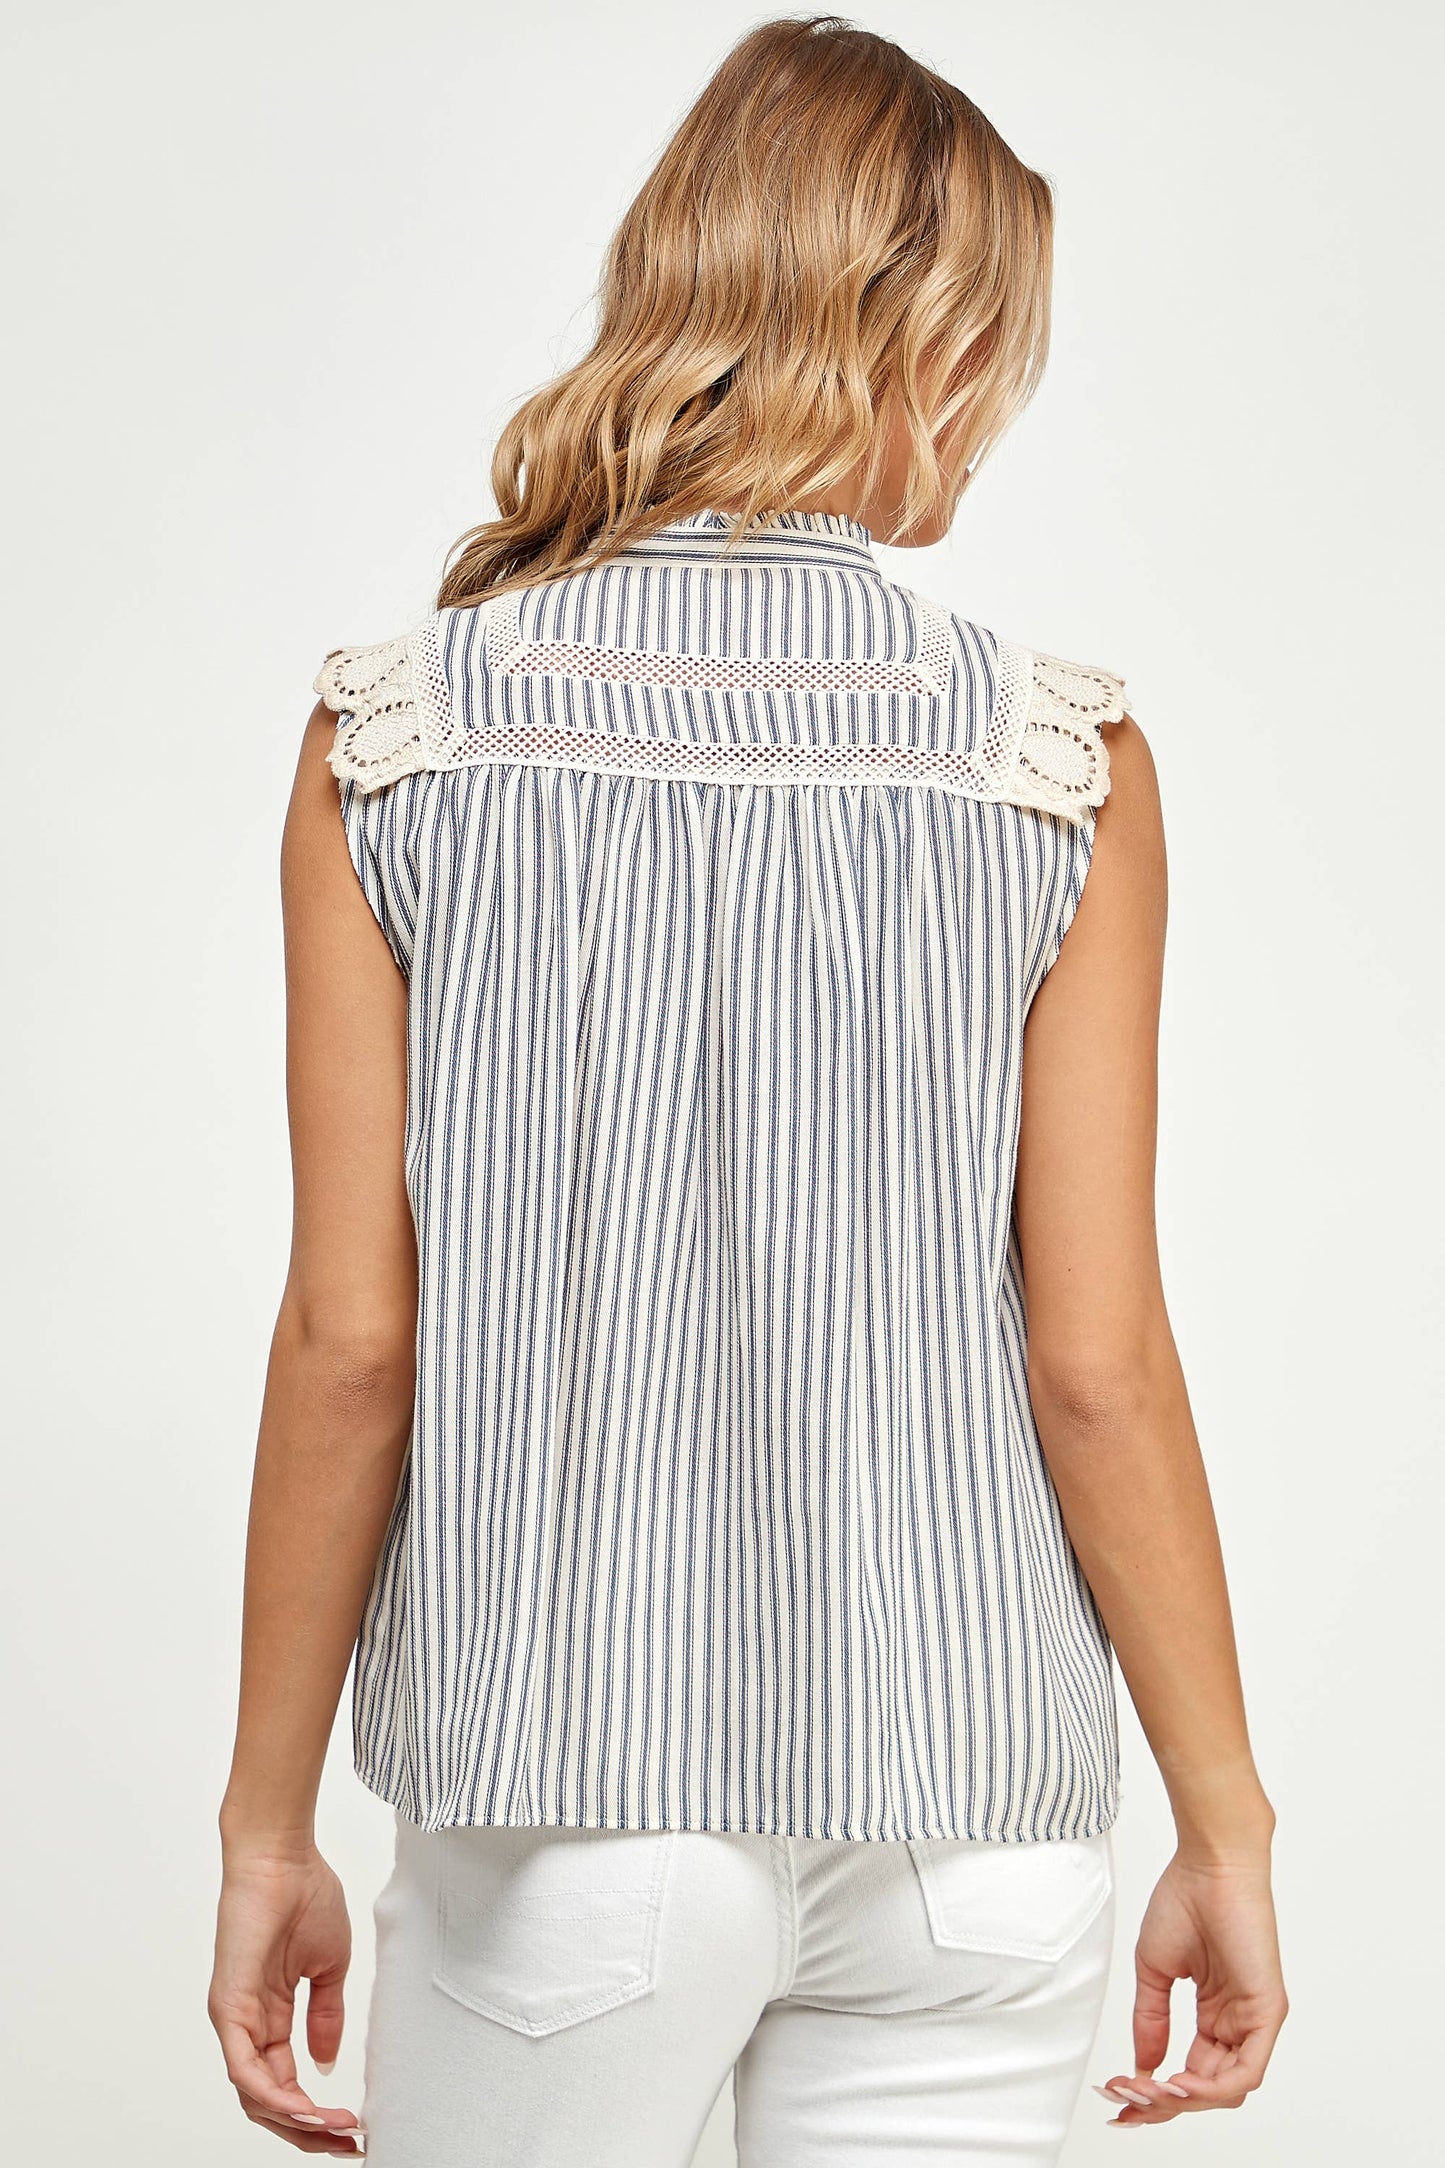 The Dolly Top